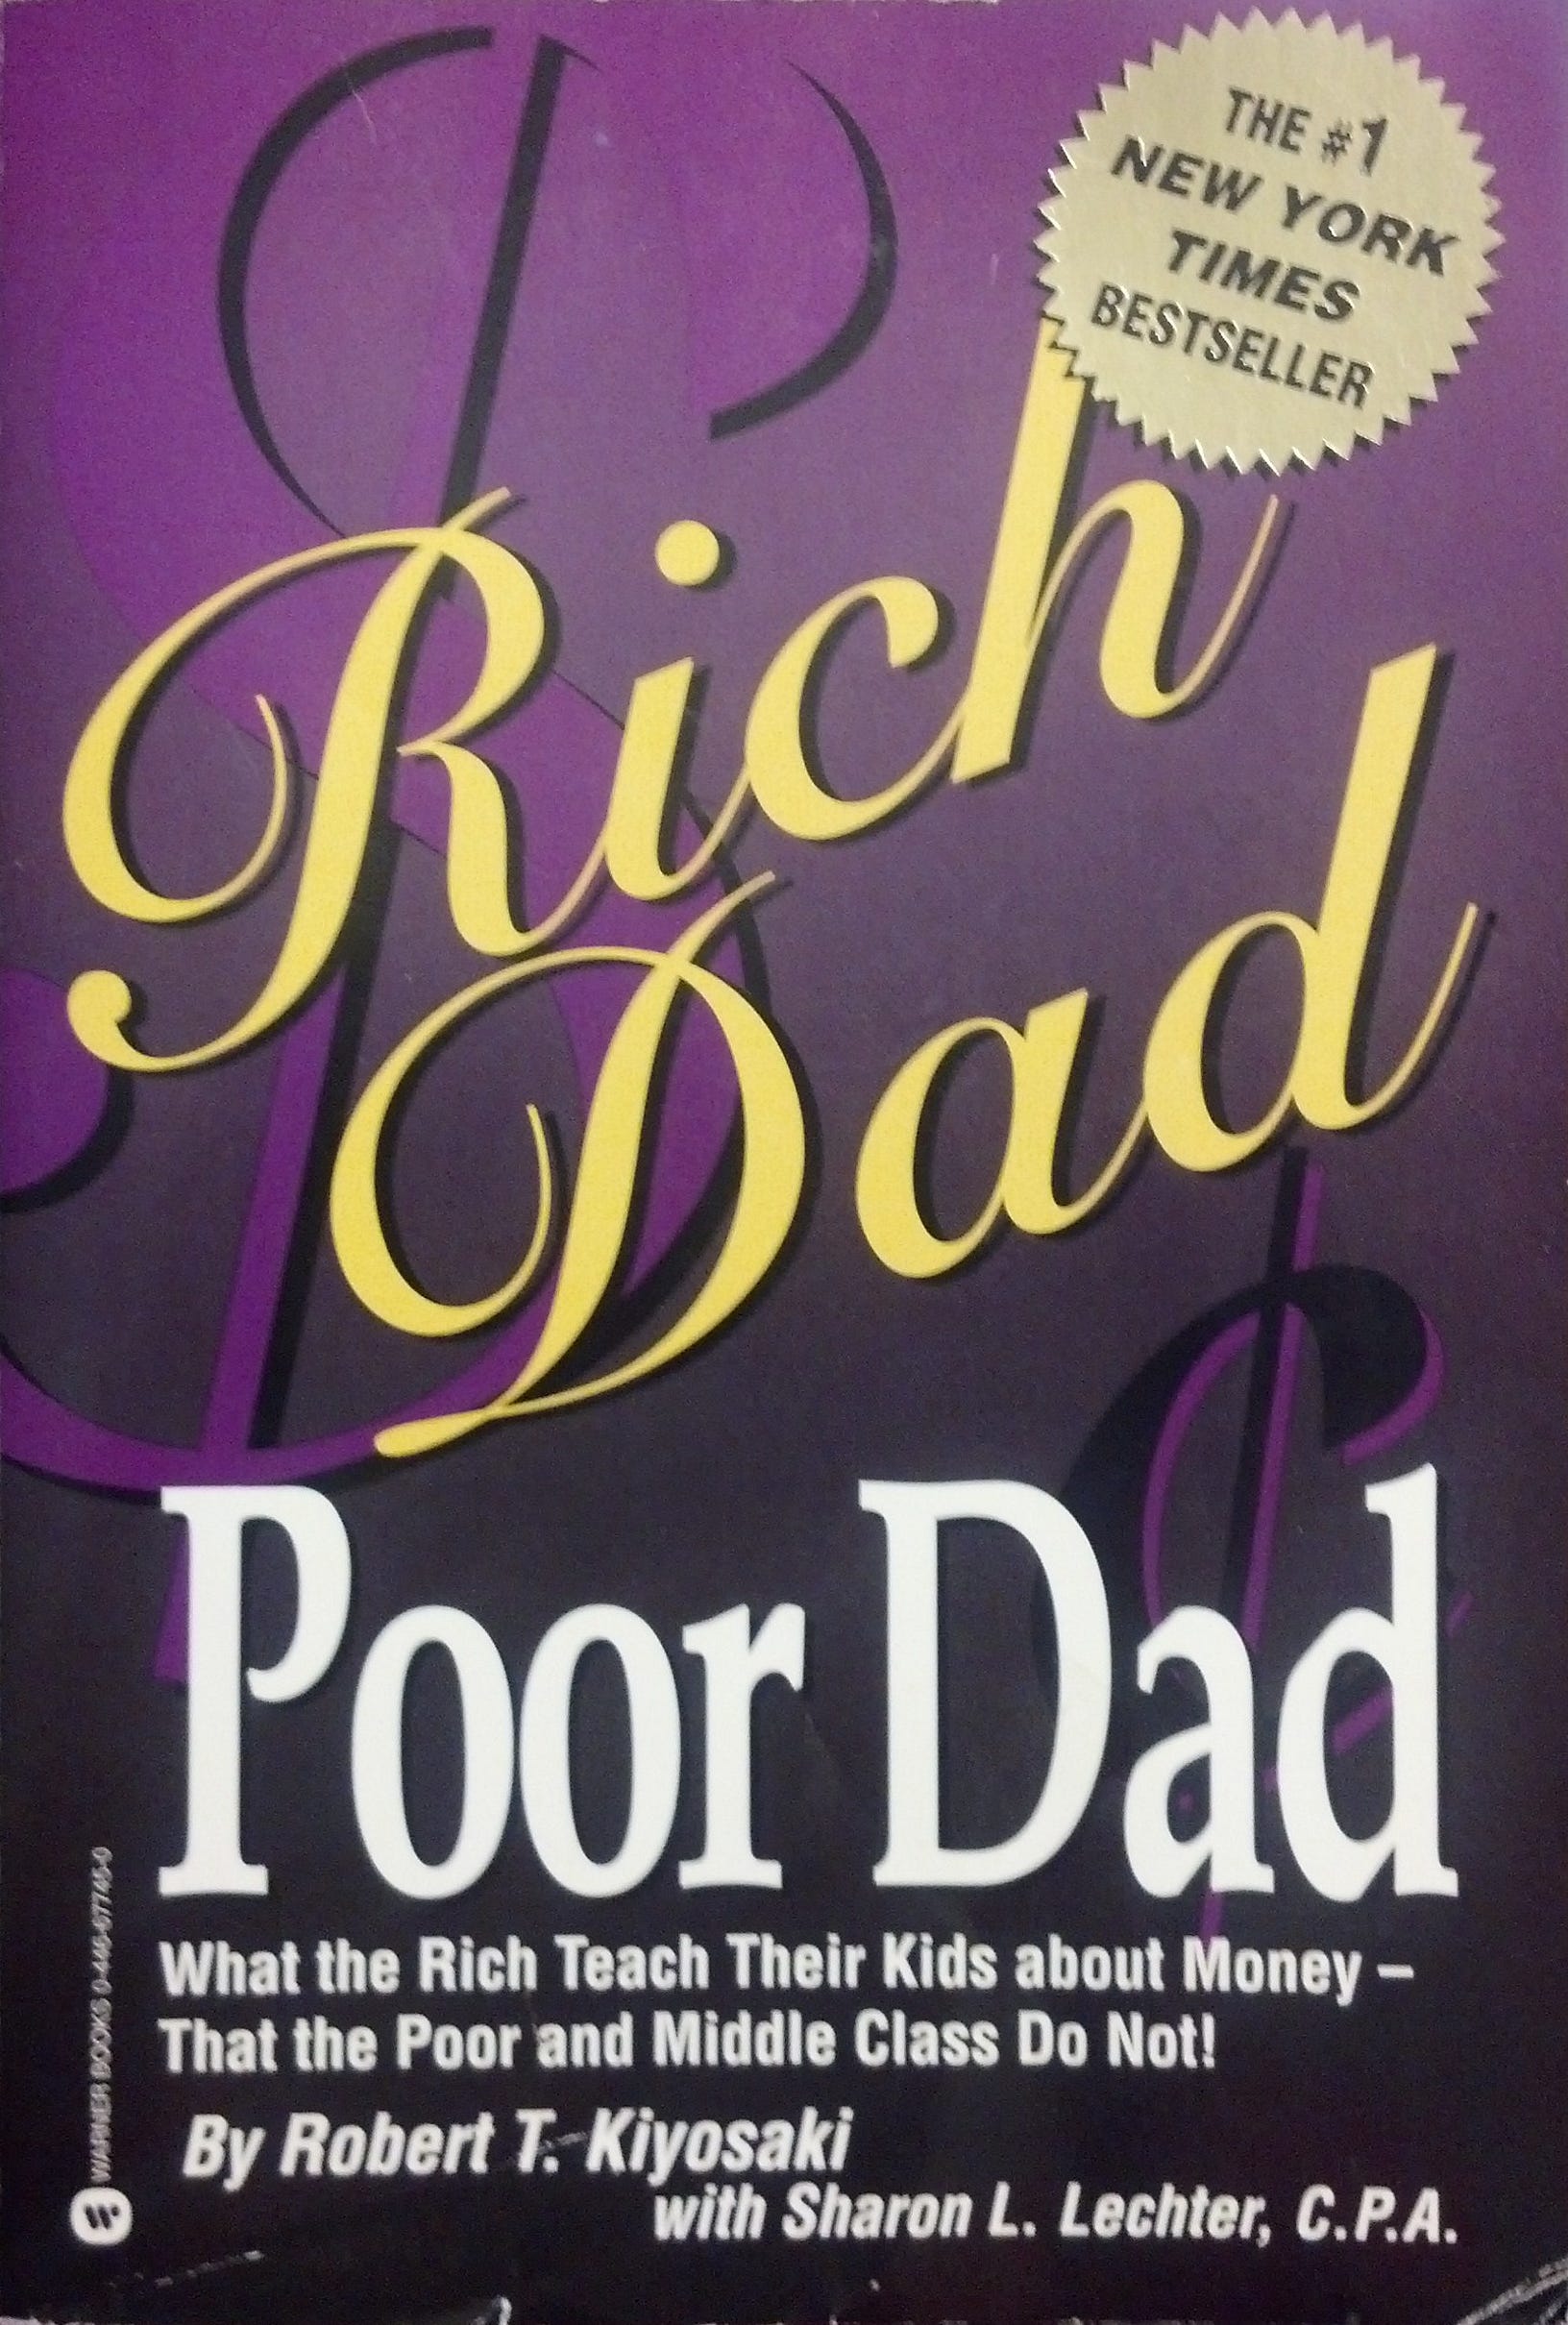 book review of rich dad and poor dad